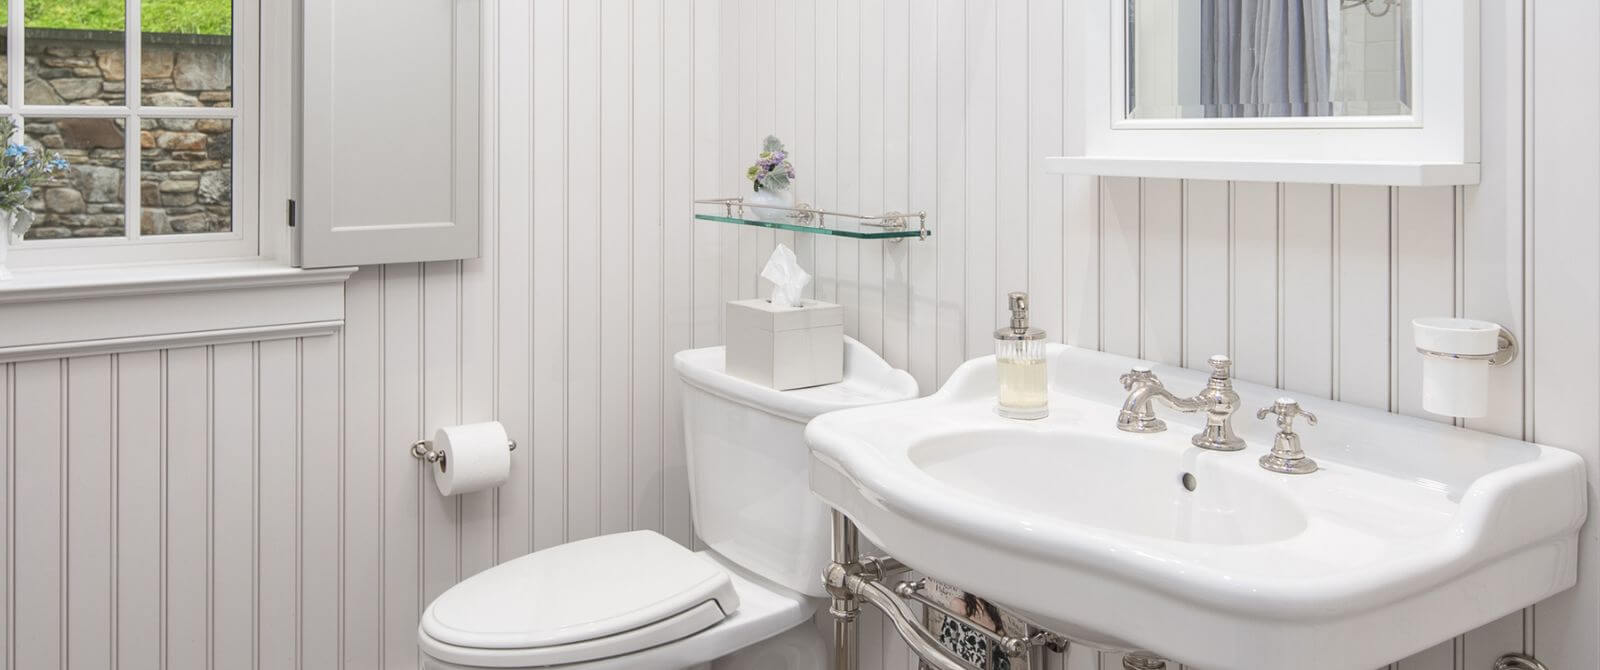 White bathroom with pedestal sink, framed mirror and toilet by a window